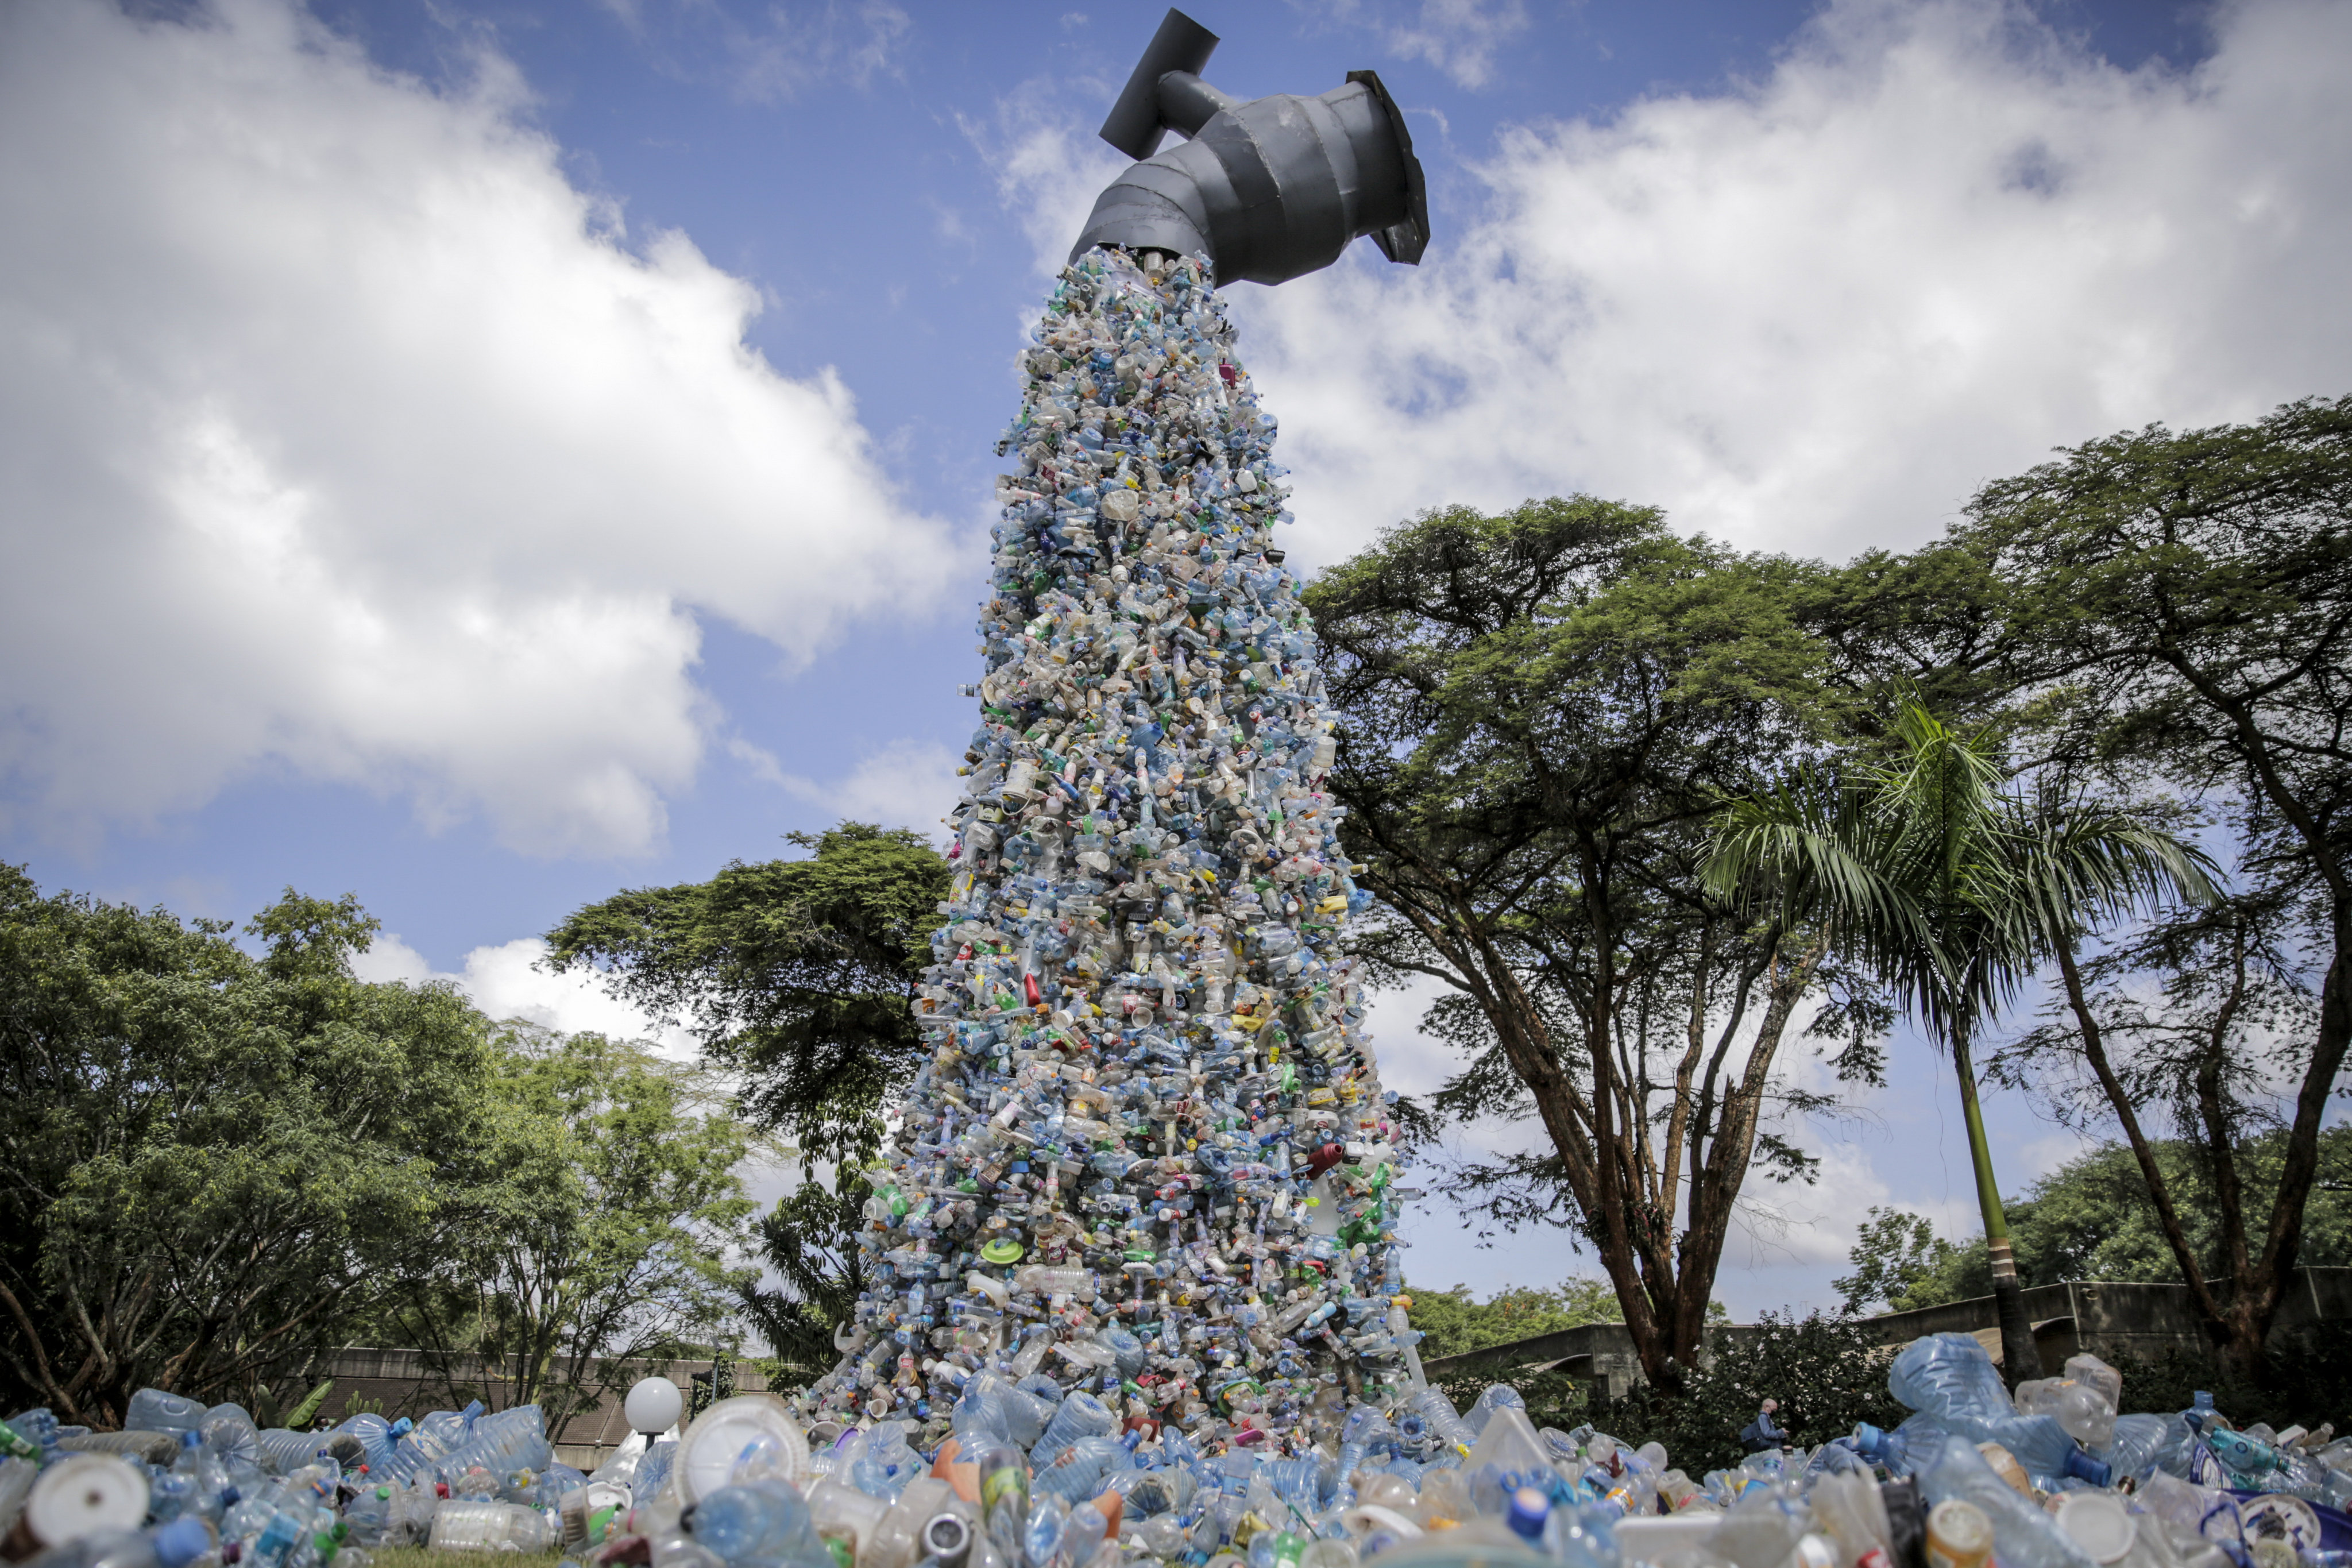 A giant art sculpture showing plastic bottles gushing from a tap is seen in Nairobi, Kenya, where a UN Environment Assembly meeting took place on March 2 to discuss a binding international framework to address the growing problem of plastic waste. Photo: AP